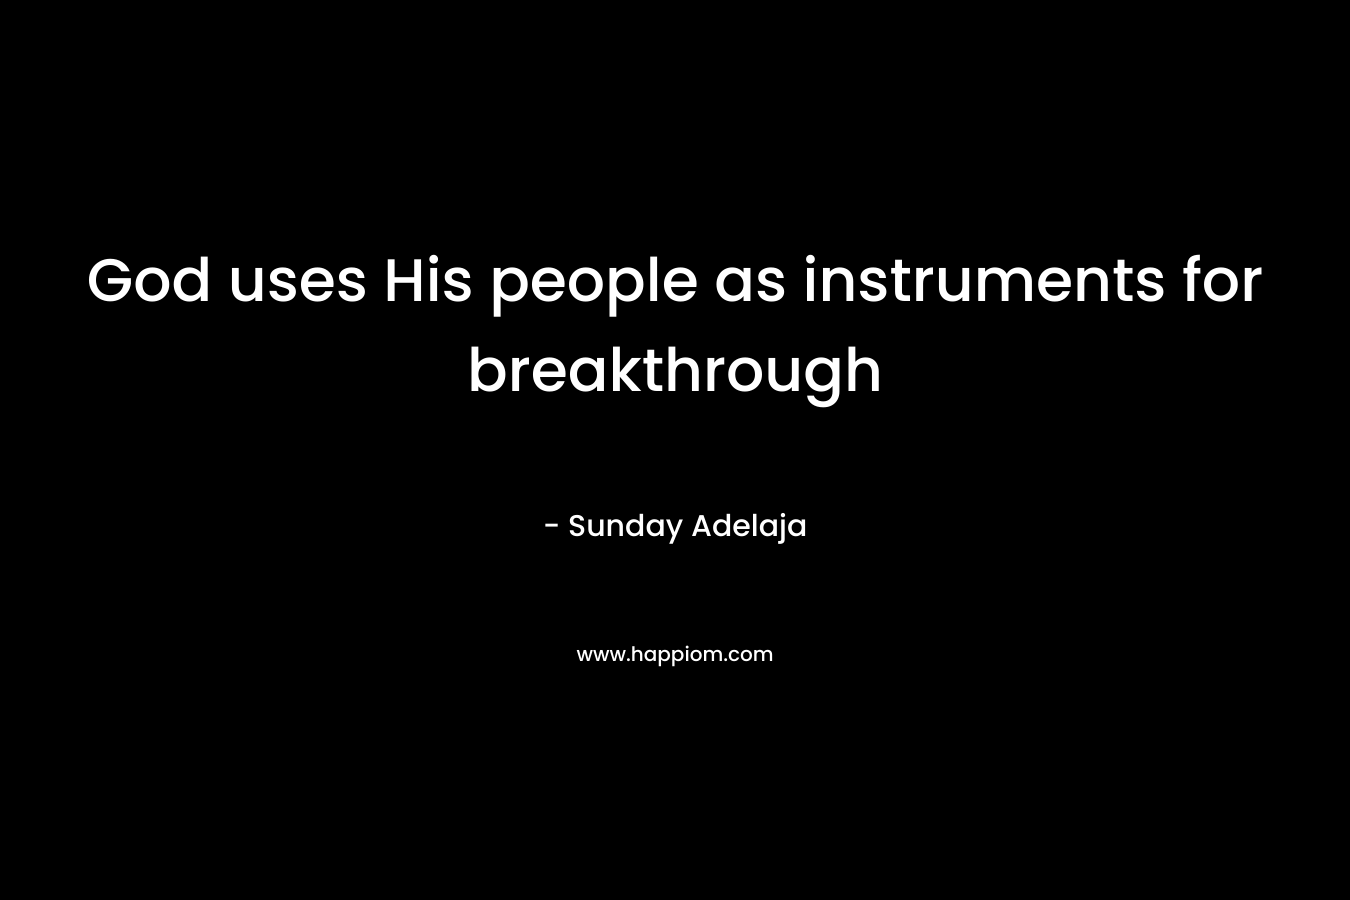 God uses His people as instruments for breakthrough